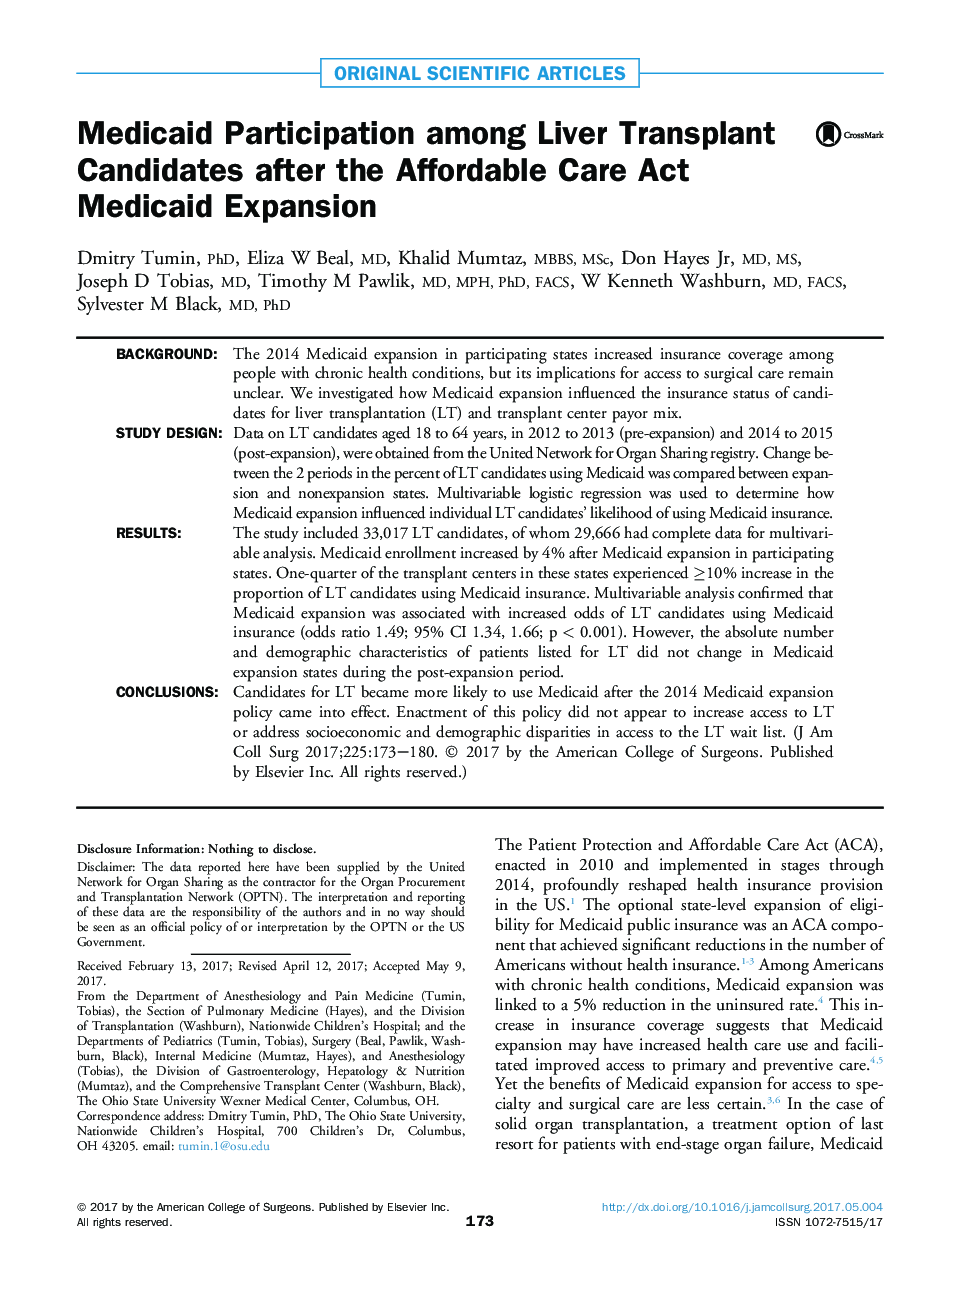 Original scientific articleMedicaid Participation among Liver Transplant Candidates after the Affordable Care Act Medicaid Expansion